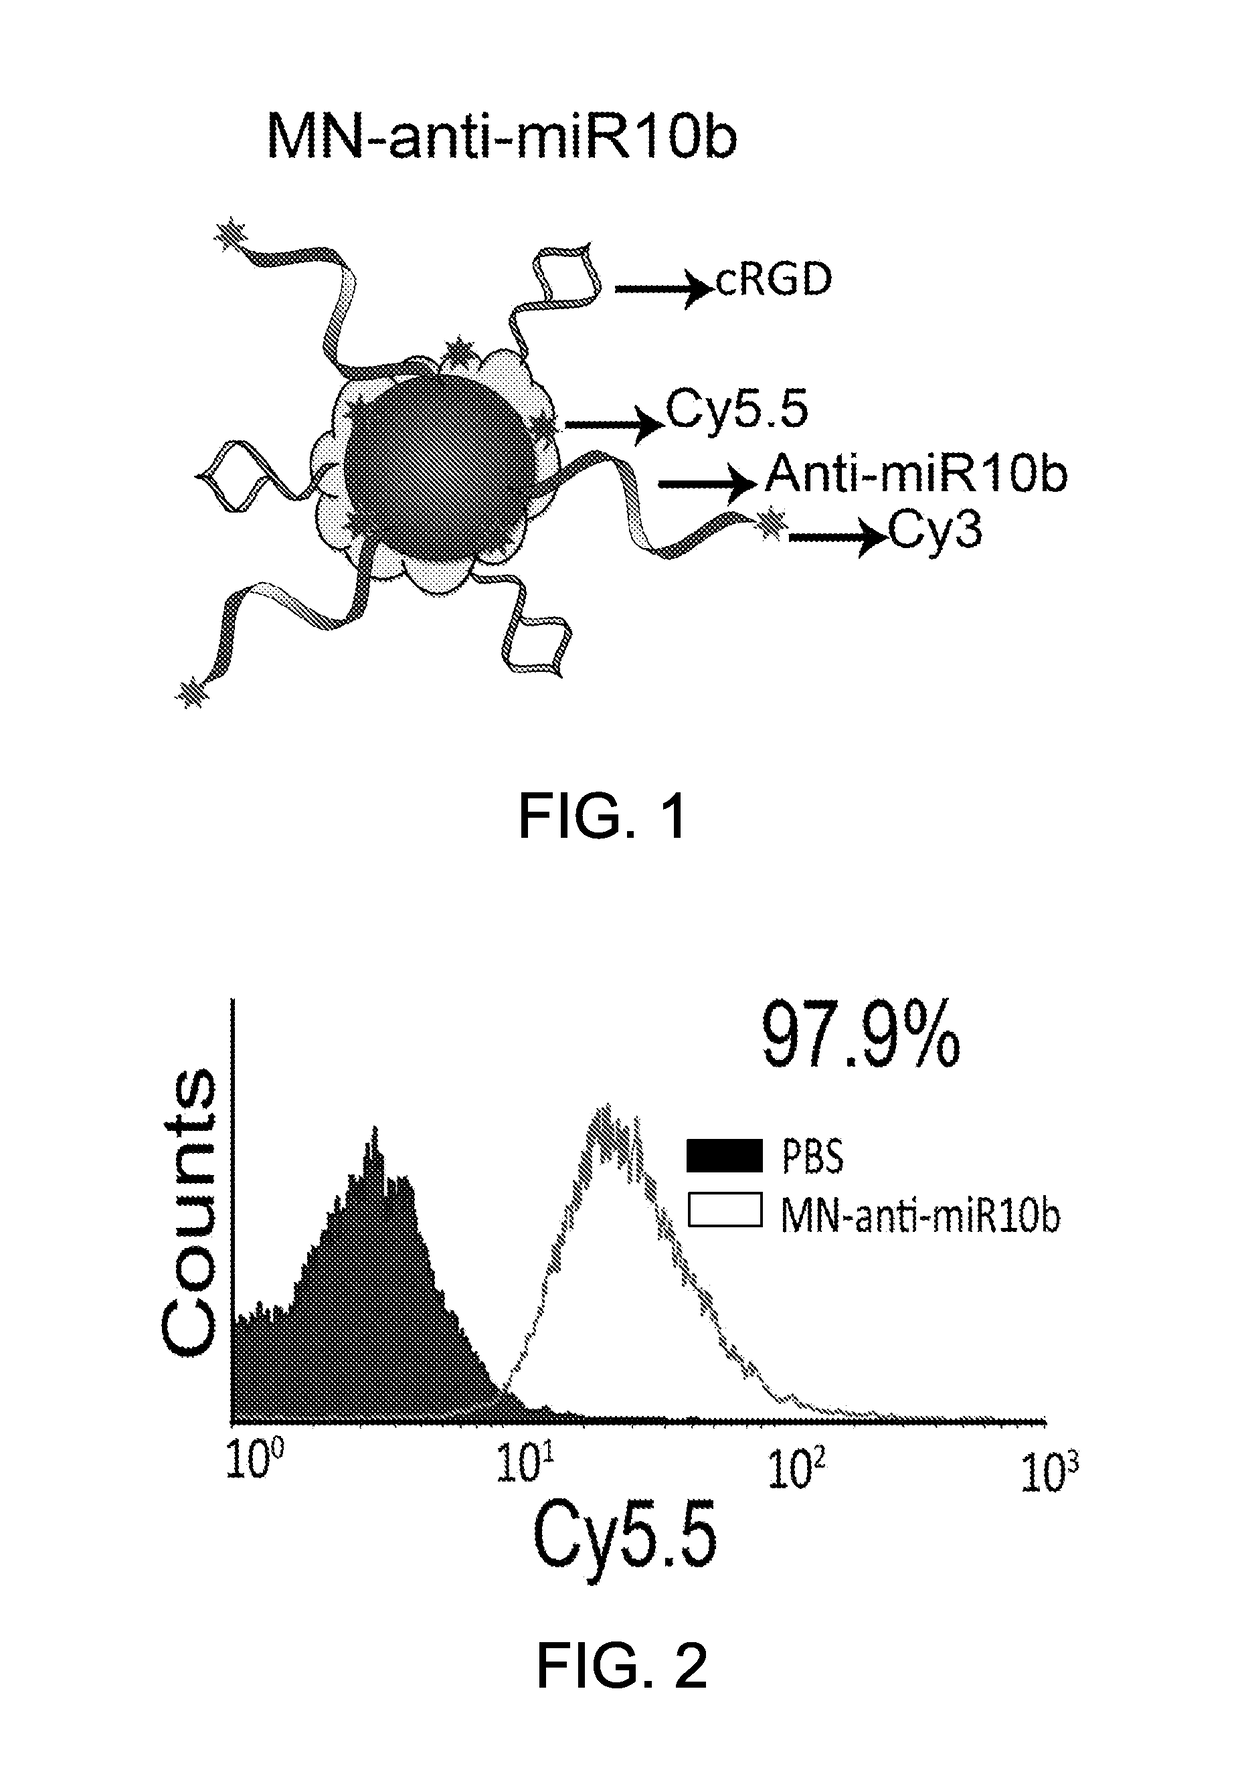 Therapeutic nanoparticles and methods of use thereof